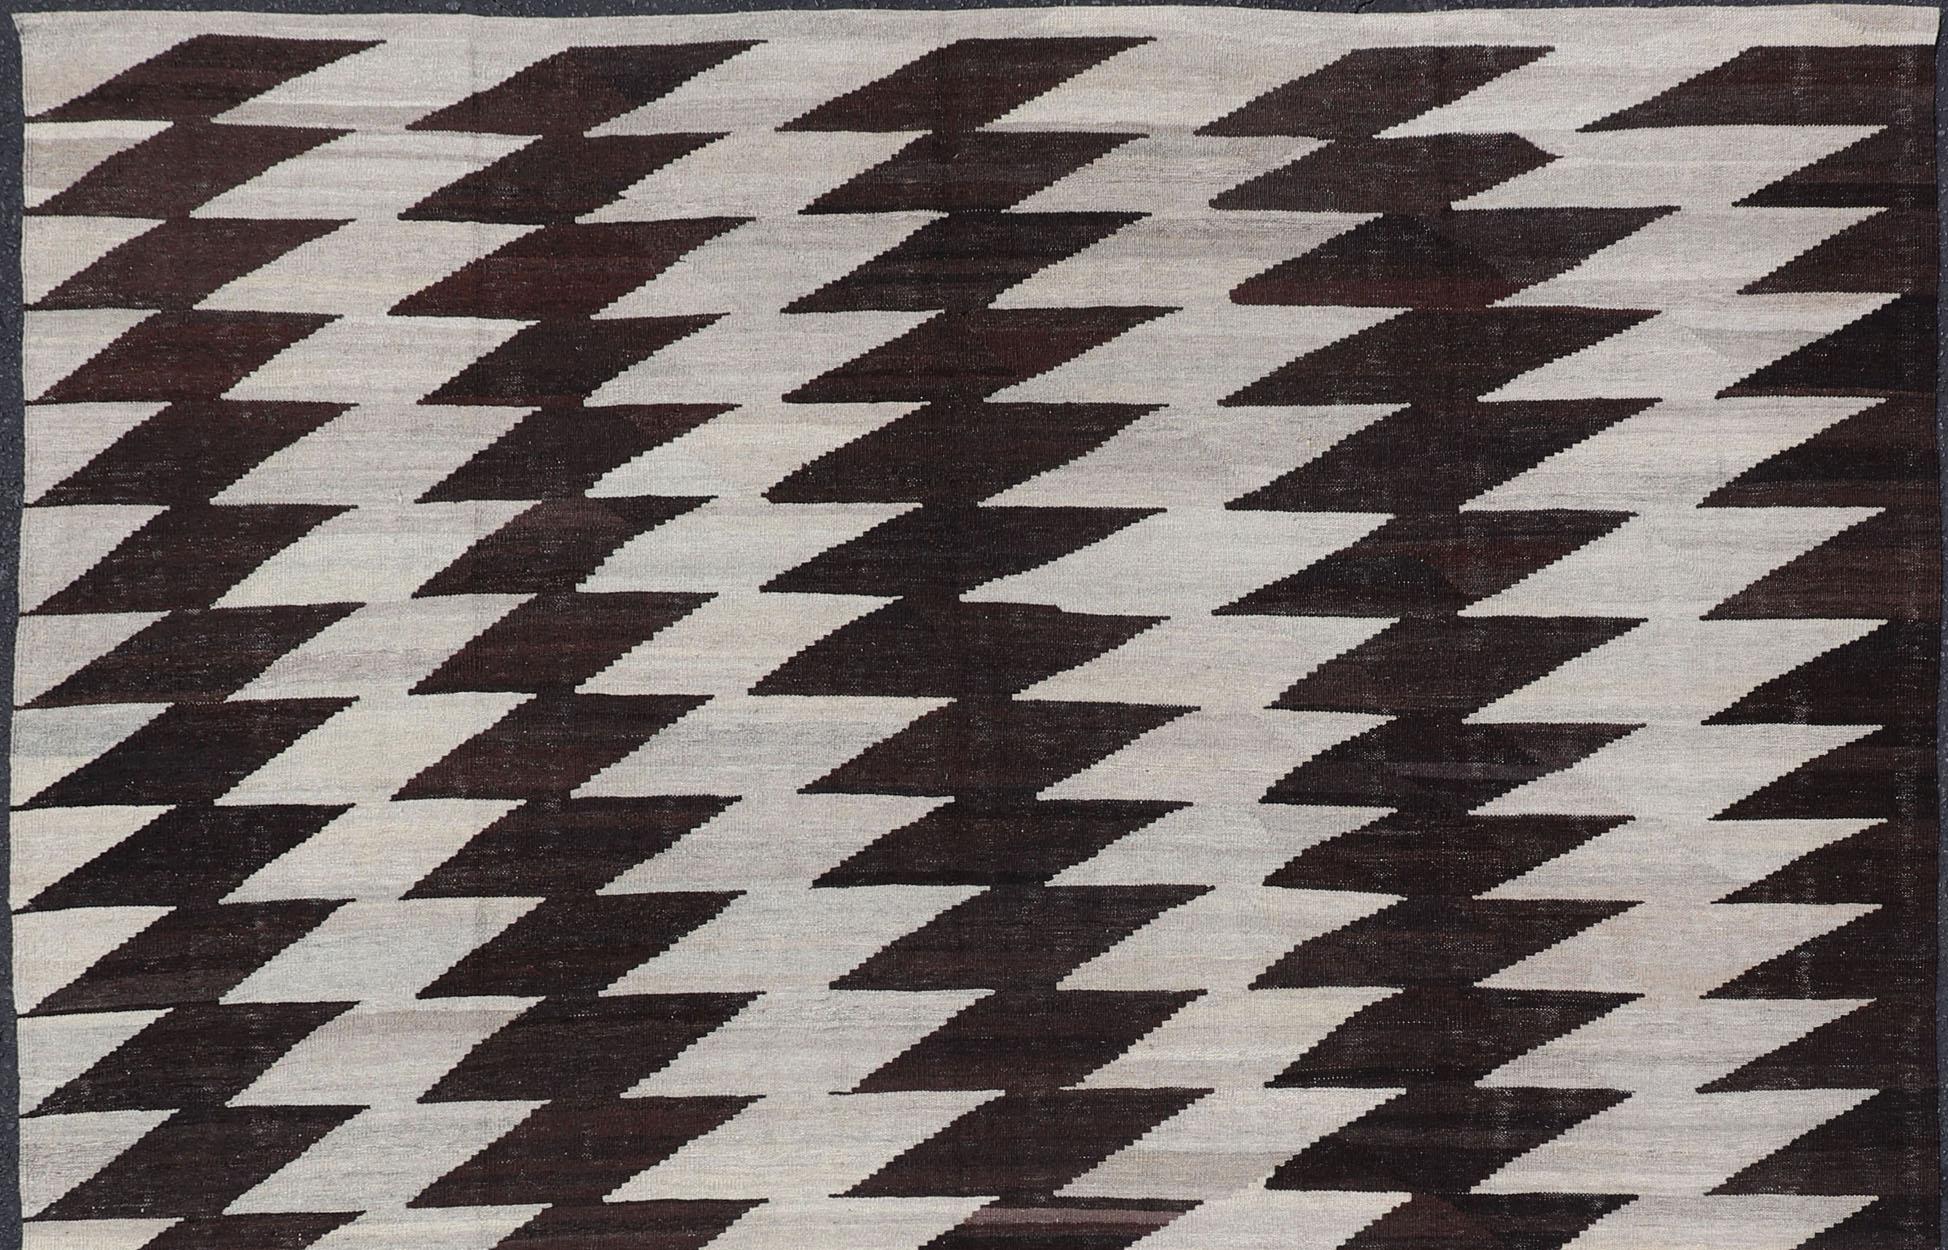 Dark Brown and white modern Kilim finely woven in Afghanistan, Keivan Woven Arts/rug /AFG-204, country of origin / type: Afghanistan / Kilim, condition: new

Measures: 7'9 x 9'8 

This brand new rug features a modern design and a flat-woven